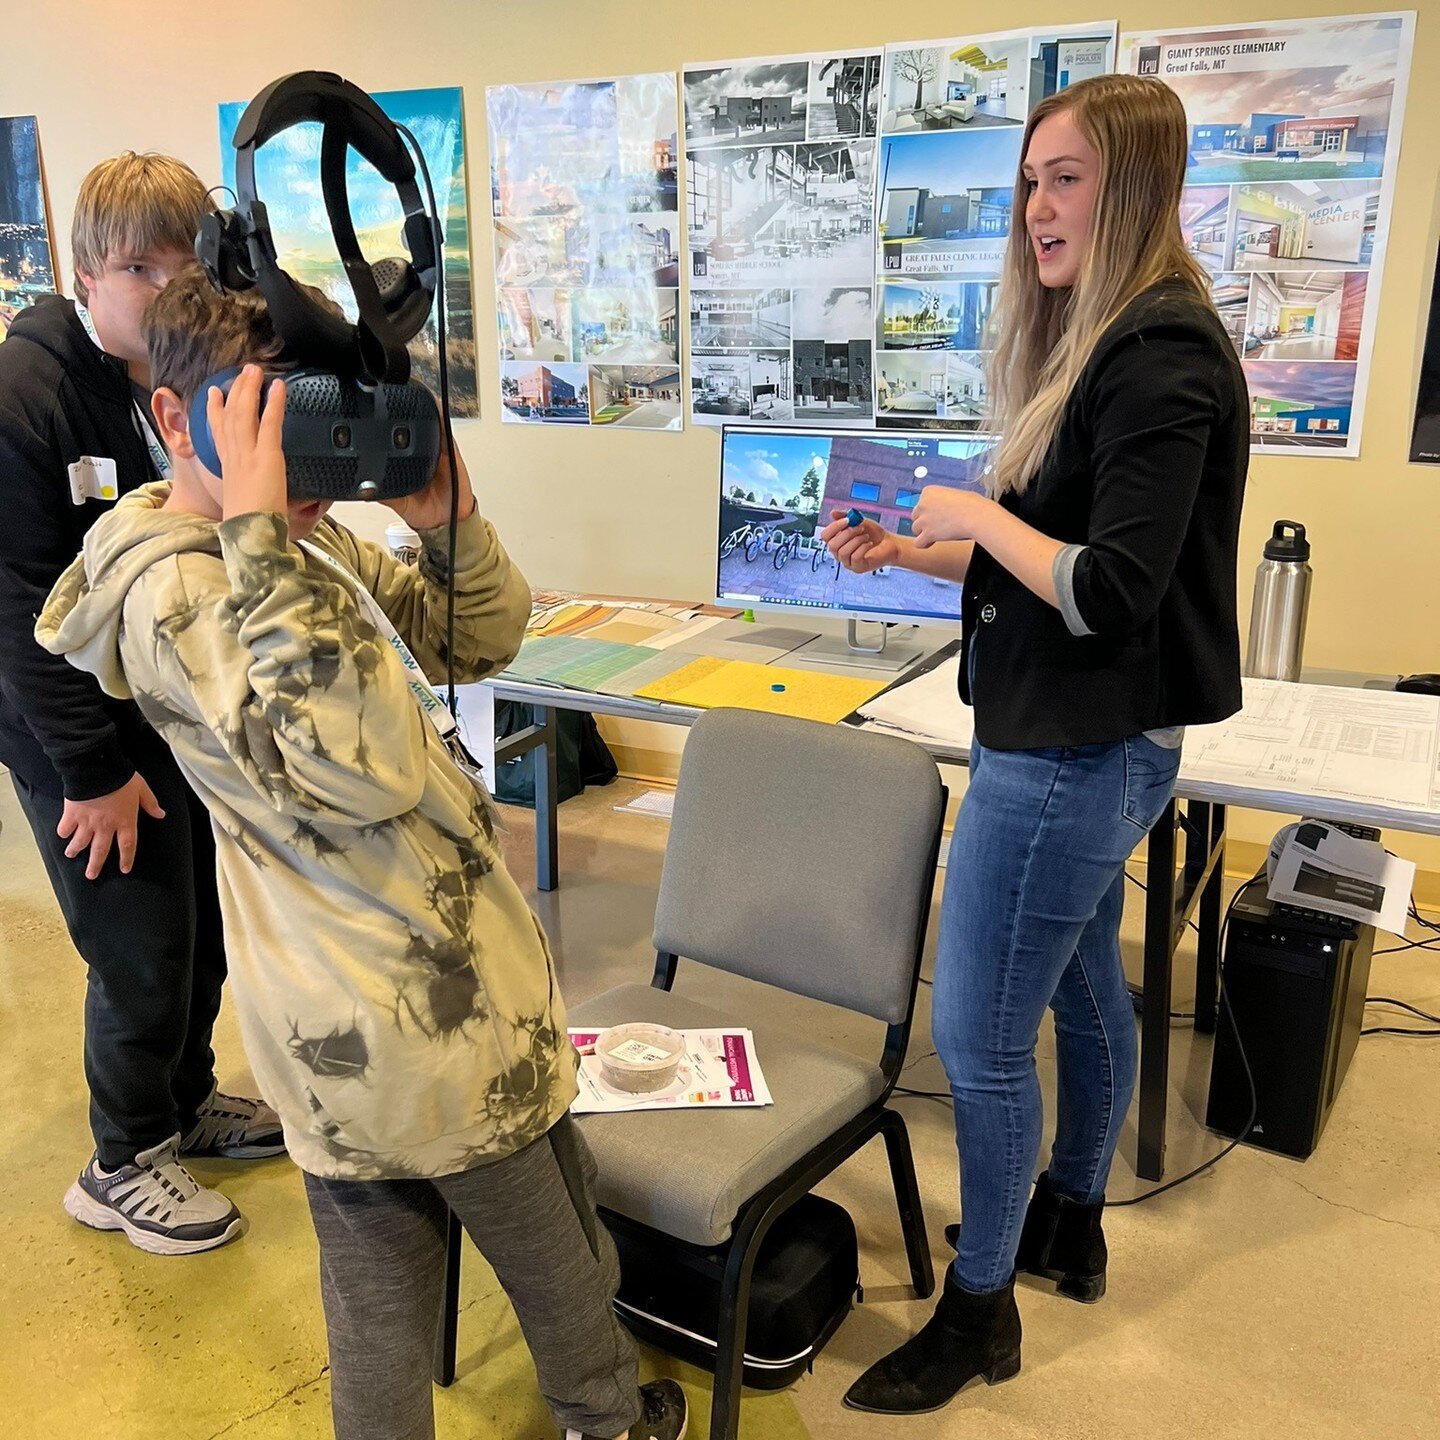 Thanks to the @greatfallschamber, @universityofprovidence, and @greatfallscollege for hosting the first World of Work event last week. Over 2000 students were in attendance to learn about the numerous career paths available to them! Our booth feature